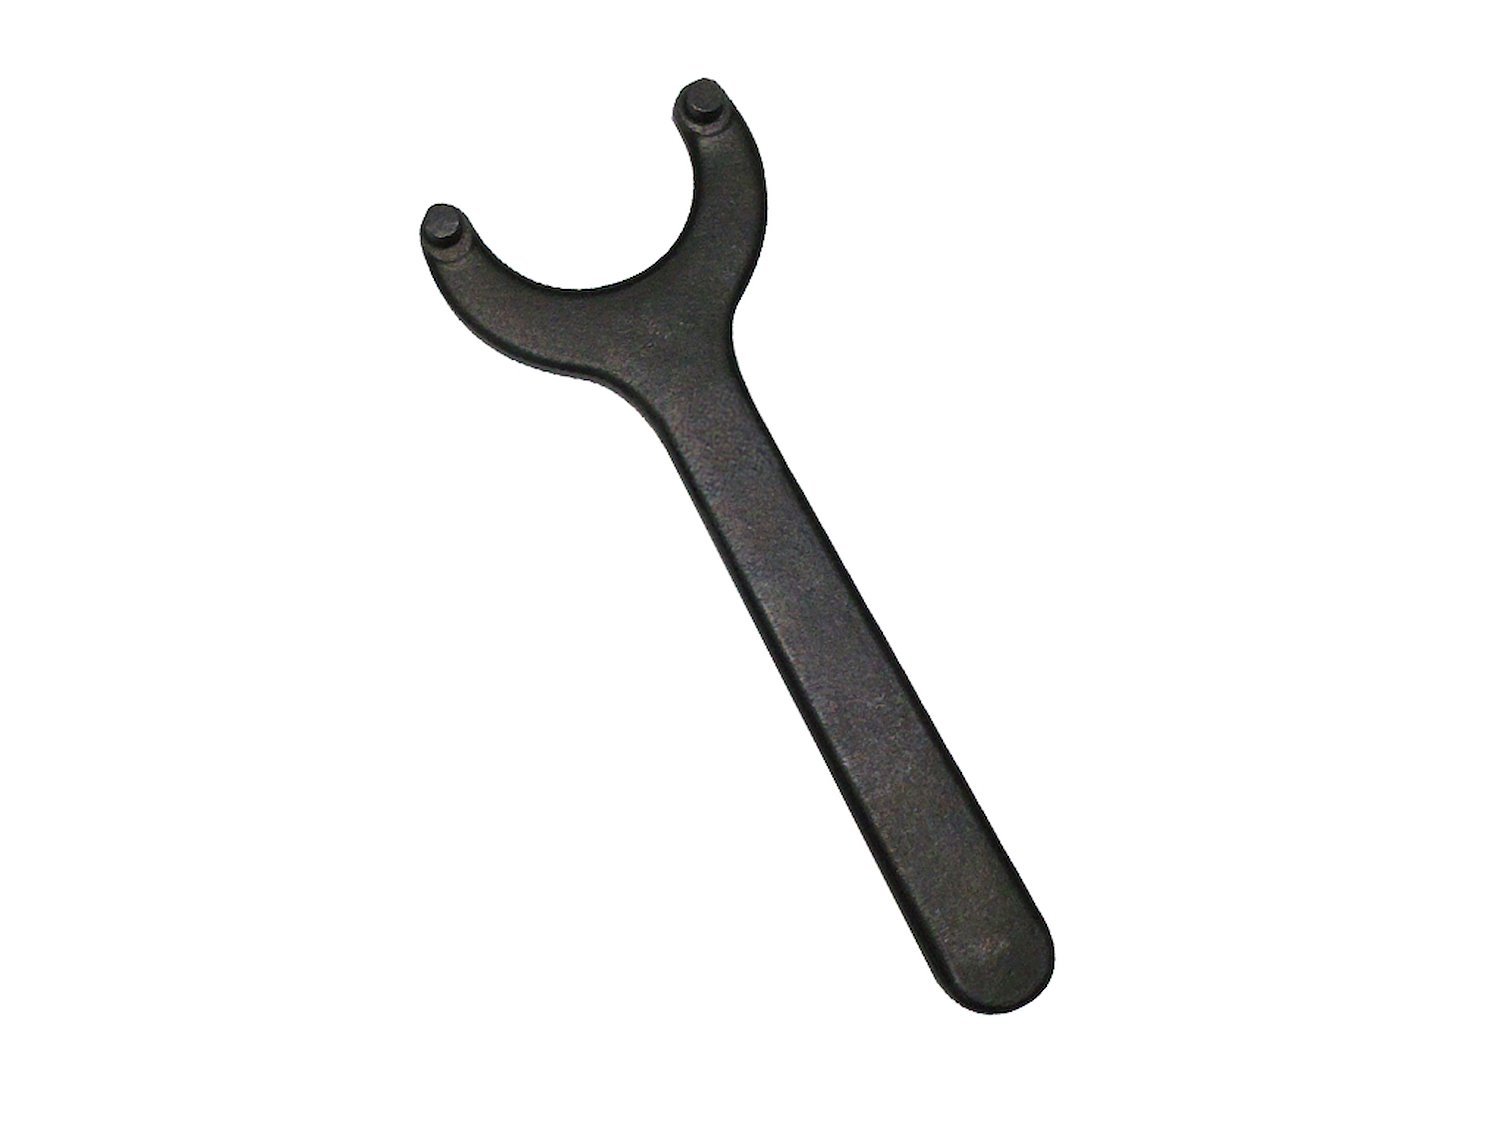 2.5 FIXED SPANNER WRENCH